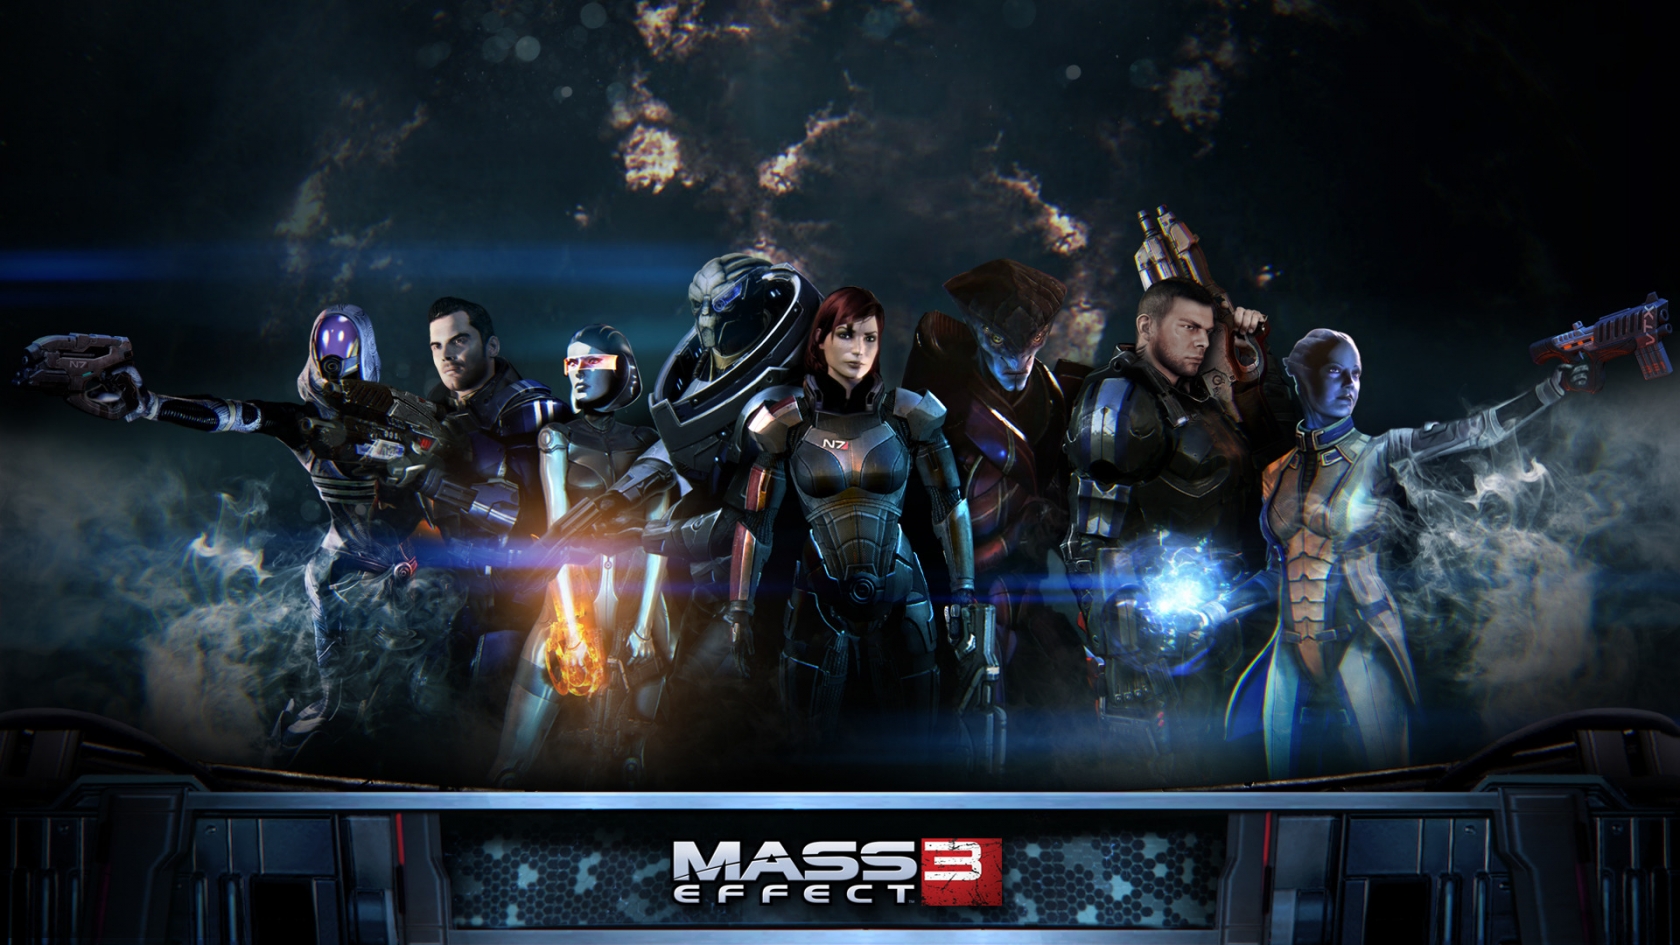 Mass Effect 3 Characters for 1680 x 945 HDTV resolution